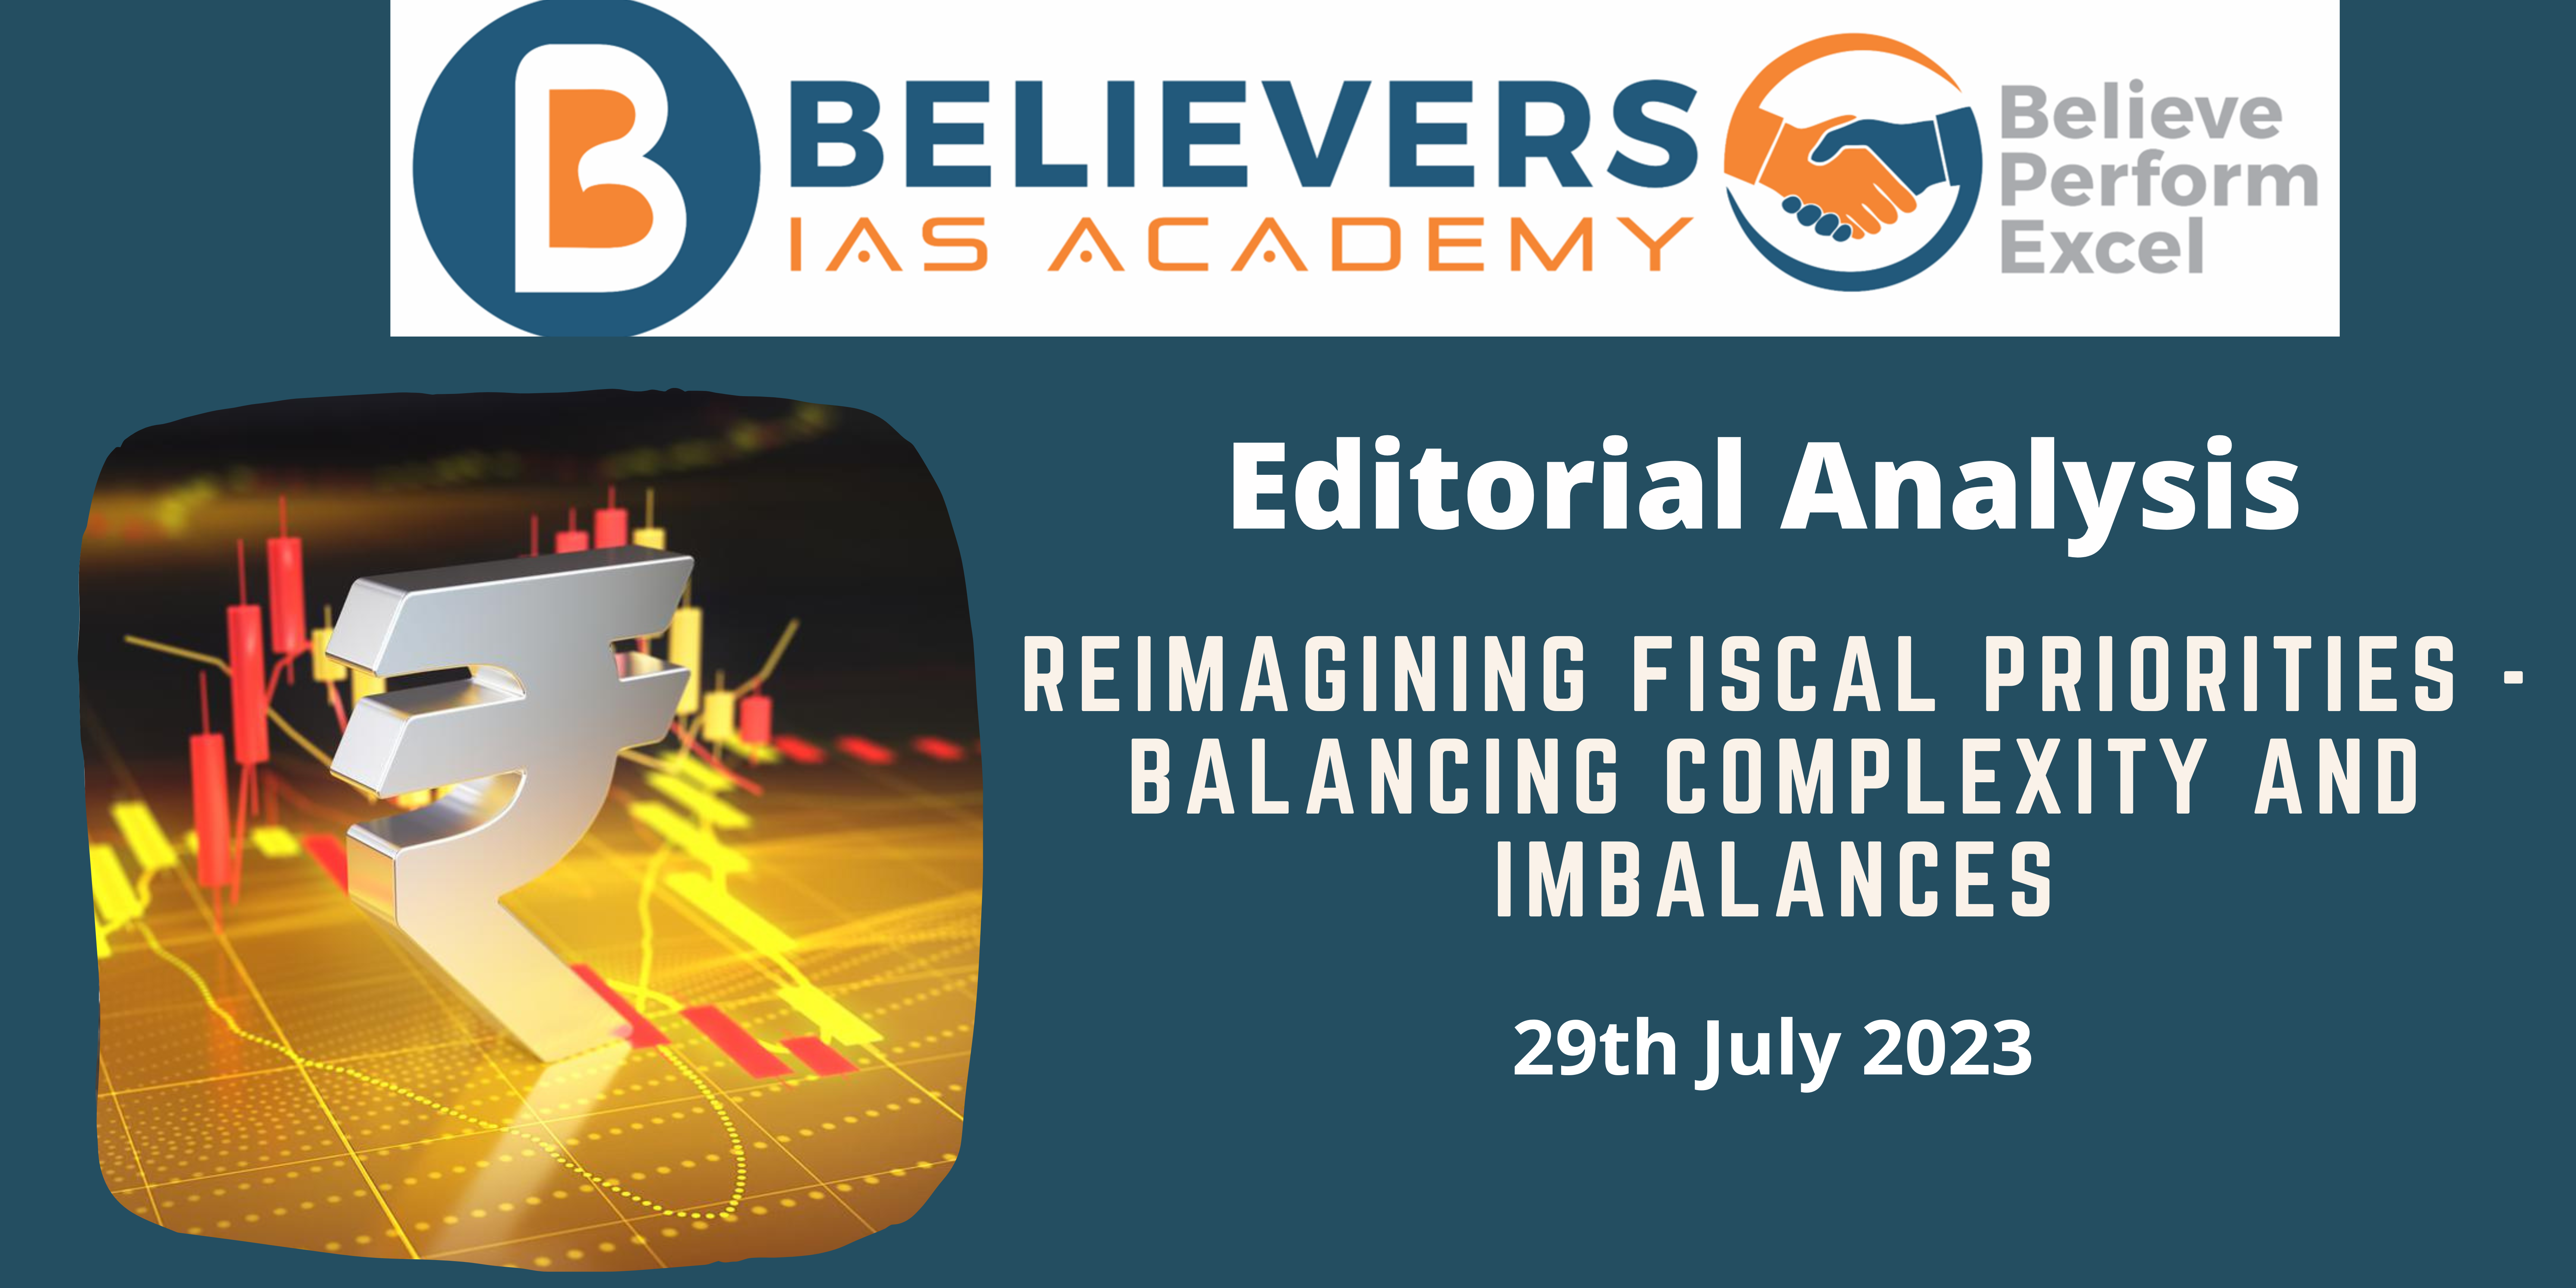 Reimagining Fiscal Priorities - Balancing Complexity and Imbalances